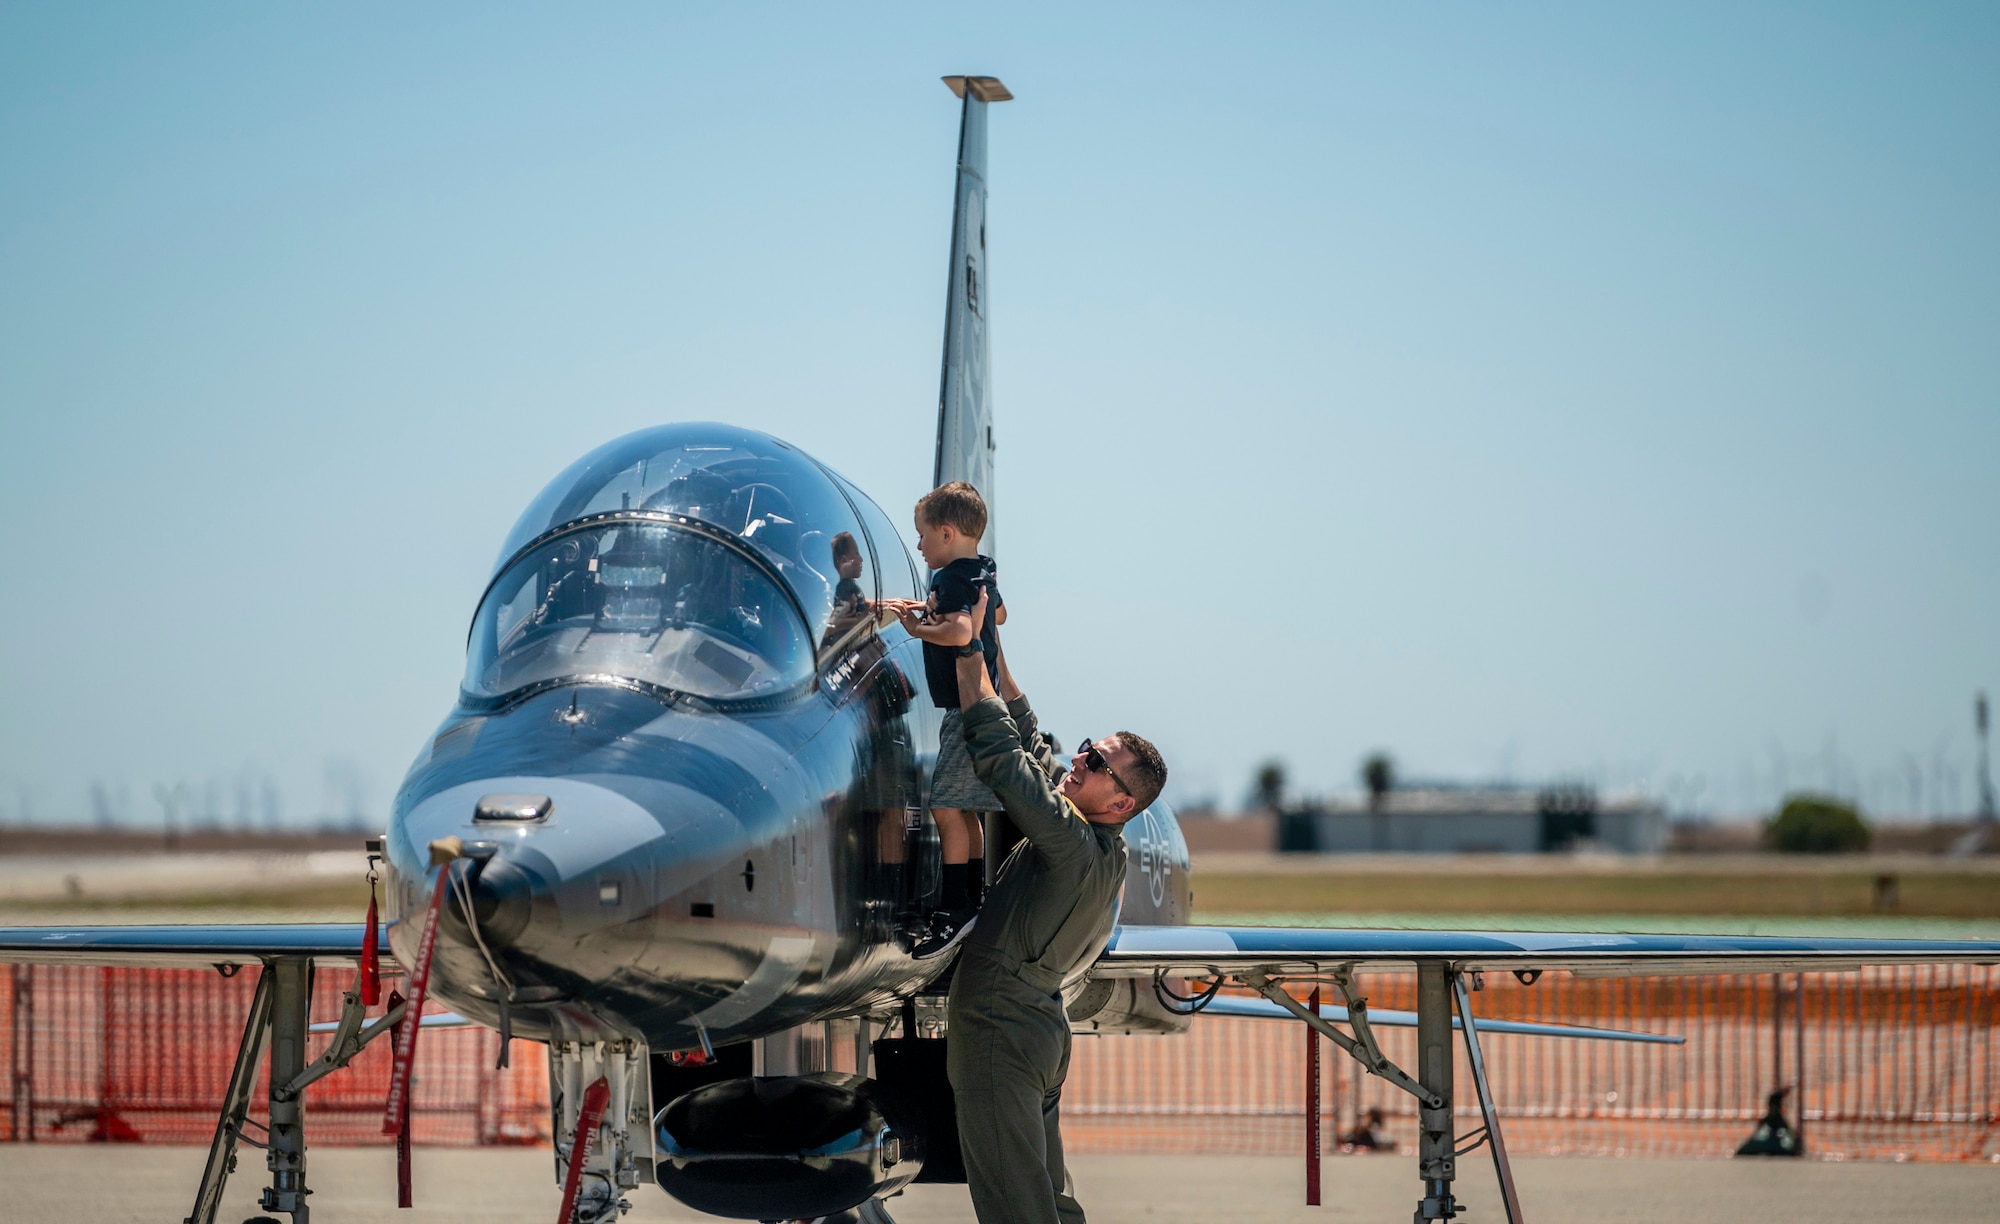 A pilot holds a child up to see an aircraft